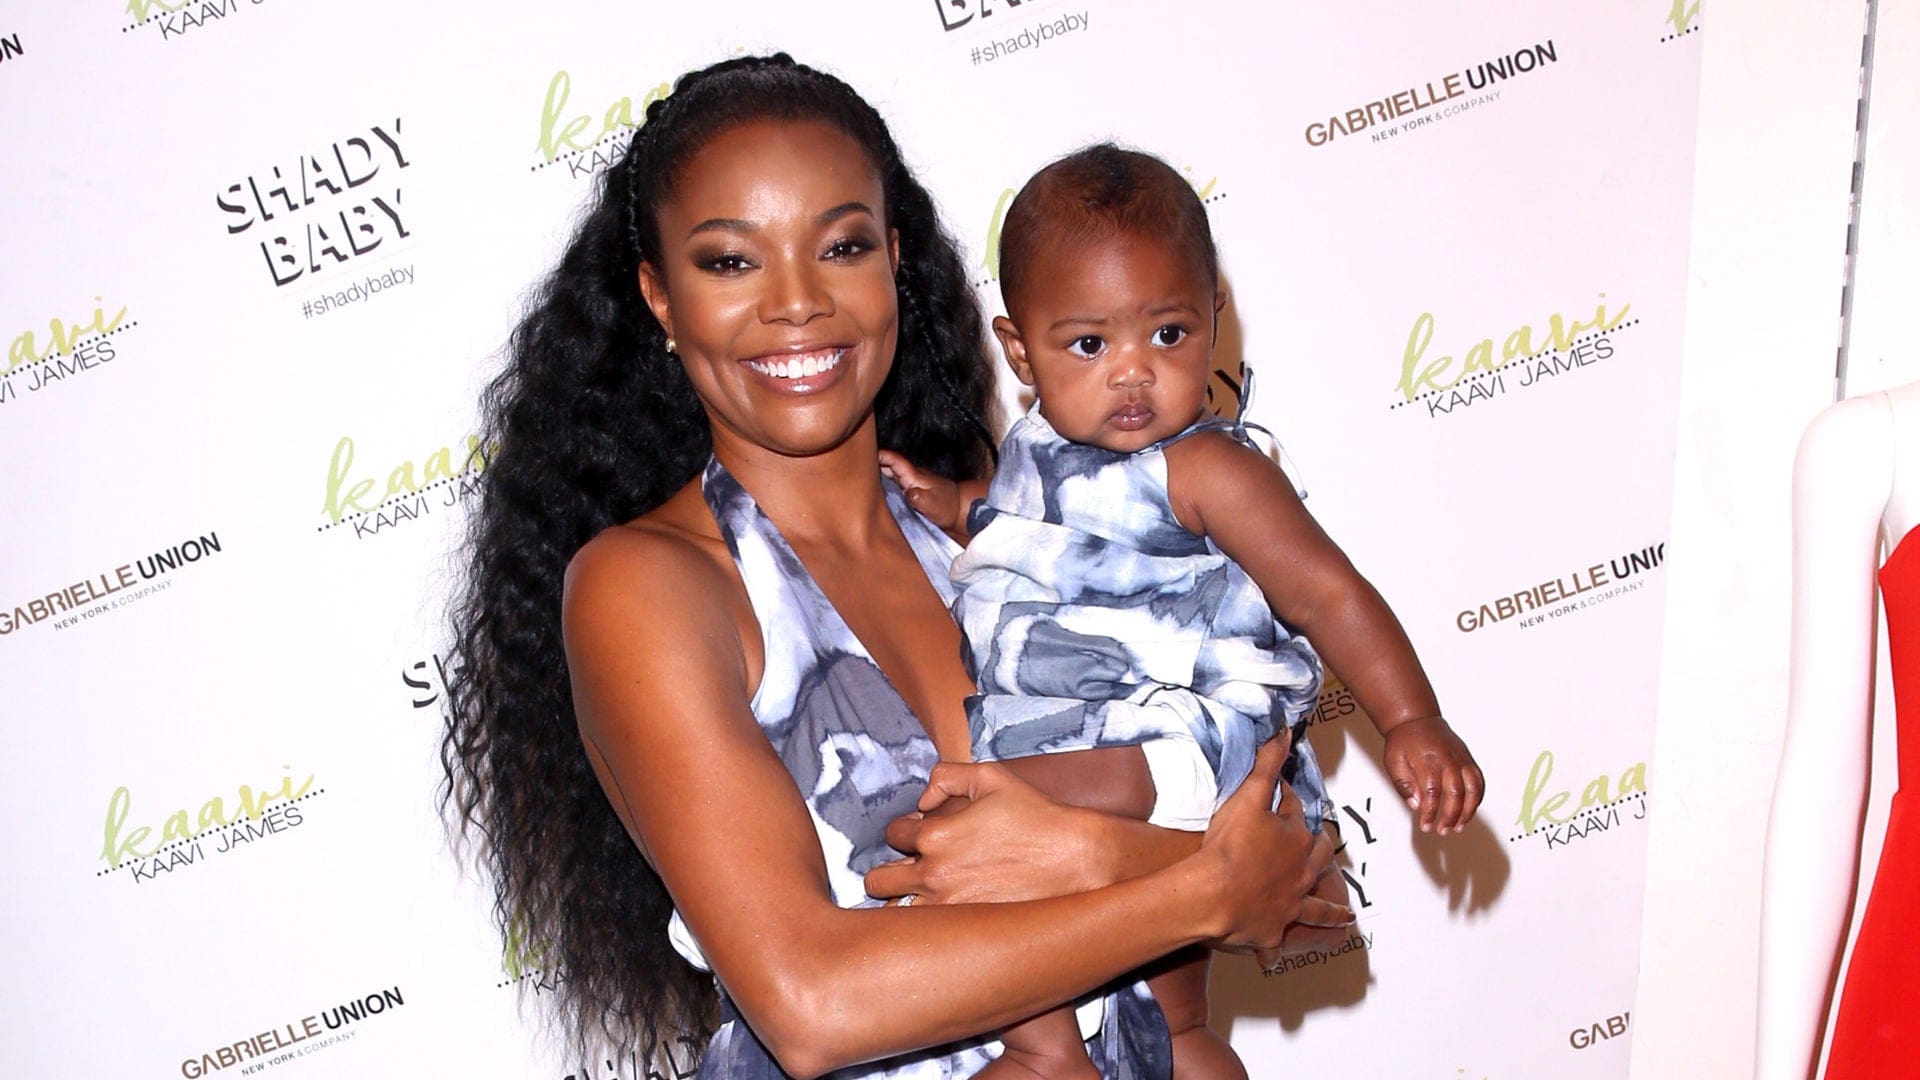 Gabrielle Union Shares A Sweet Video Featuring Baby Girl, Kaavia James